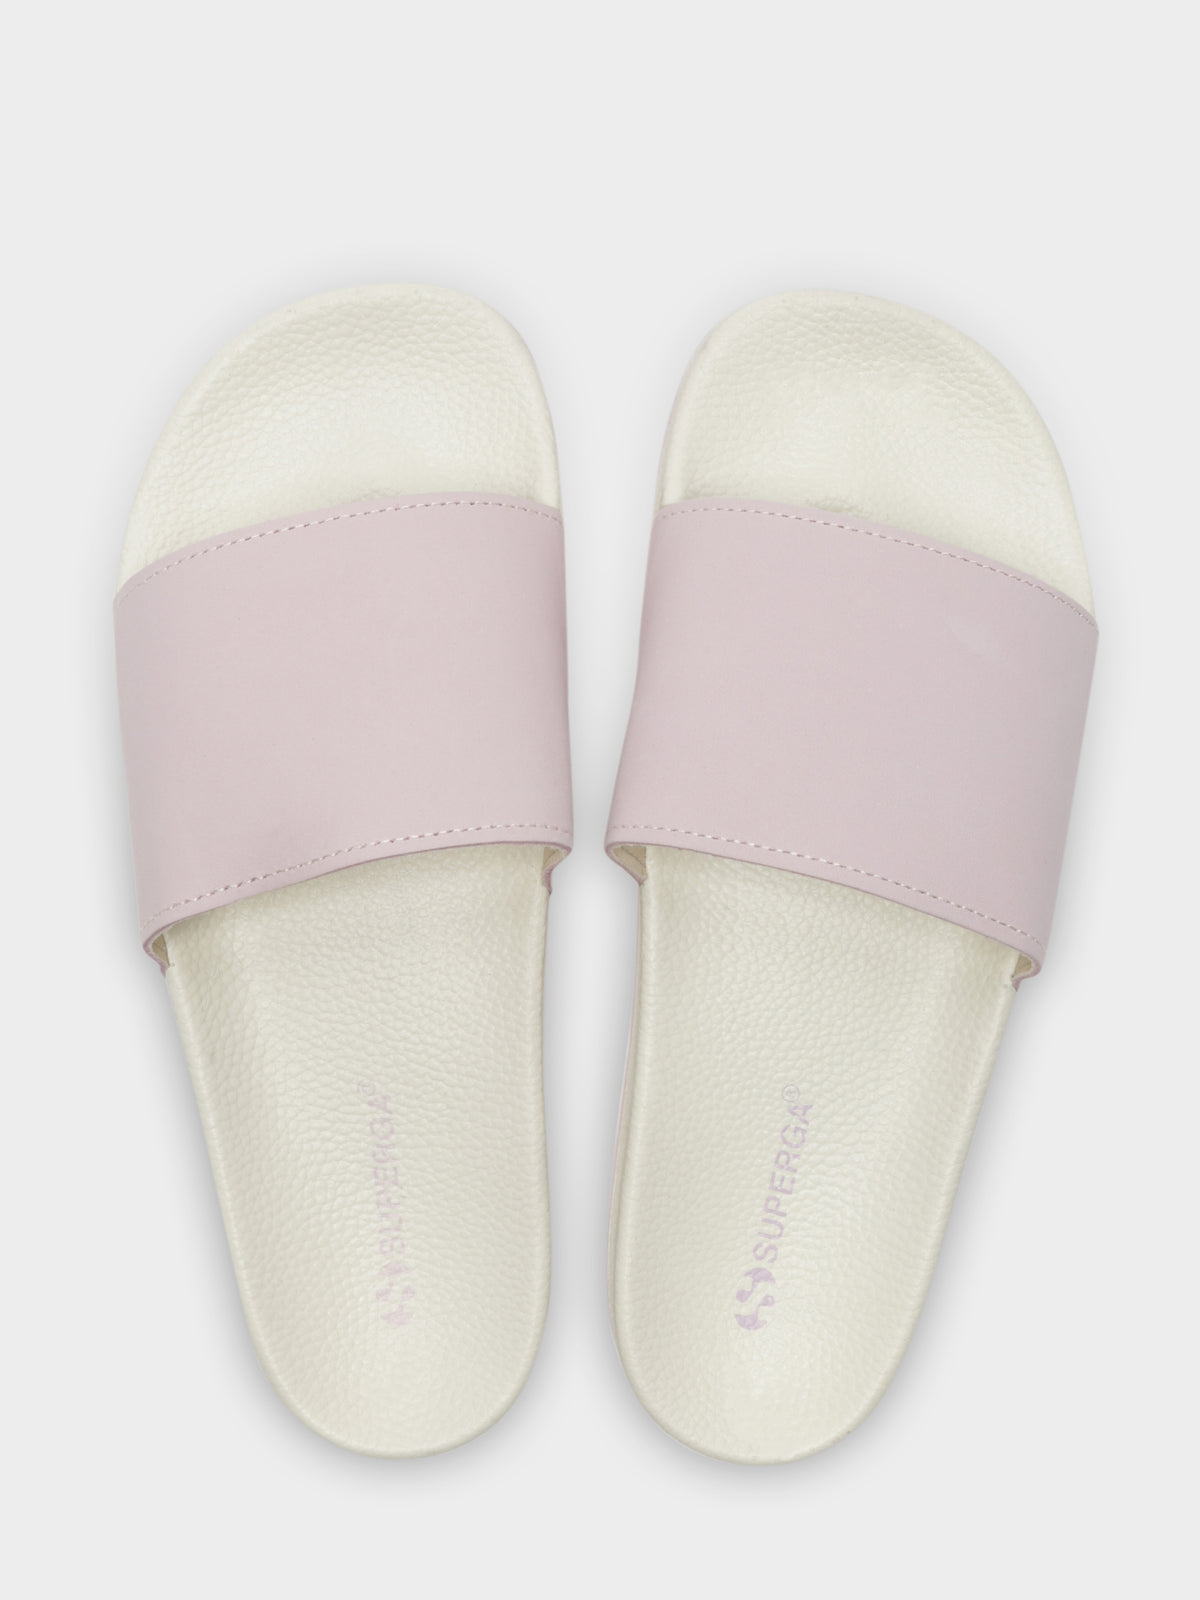 Womens 1908 Leabuttersoftu Slides in Biege, Sand &amp; Pink Pale Lilac